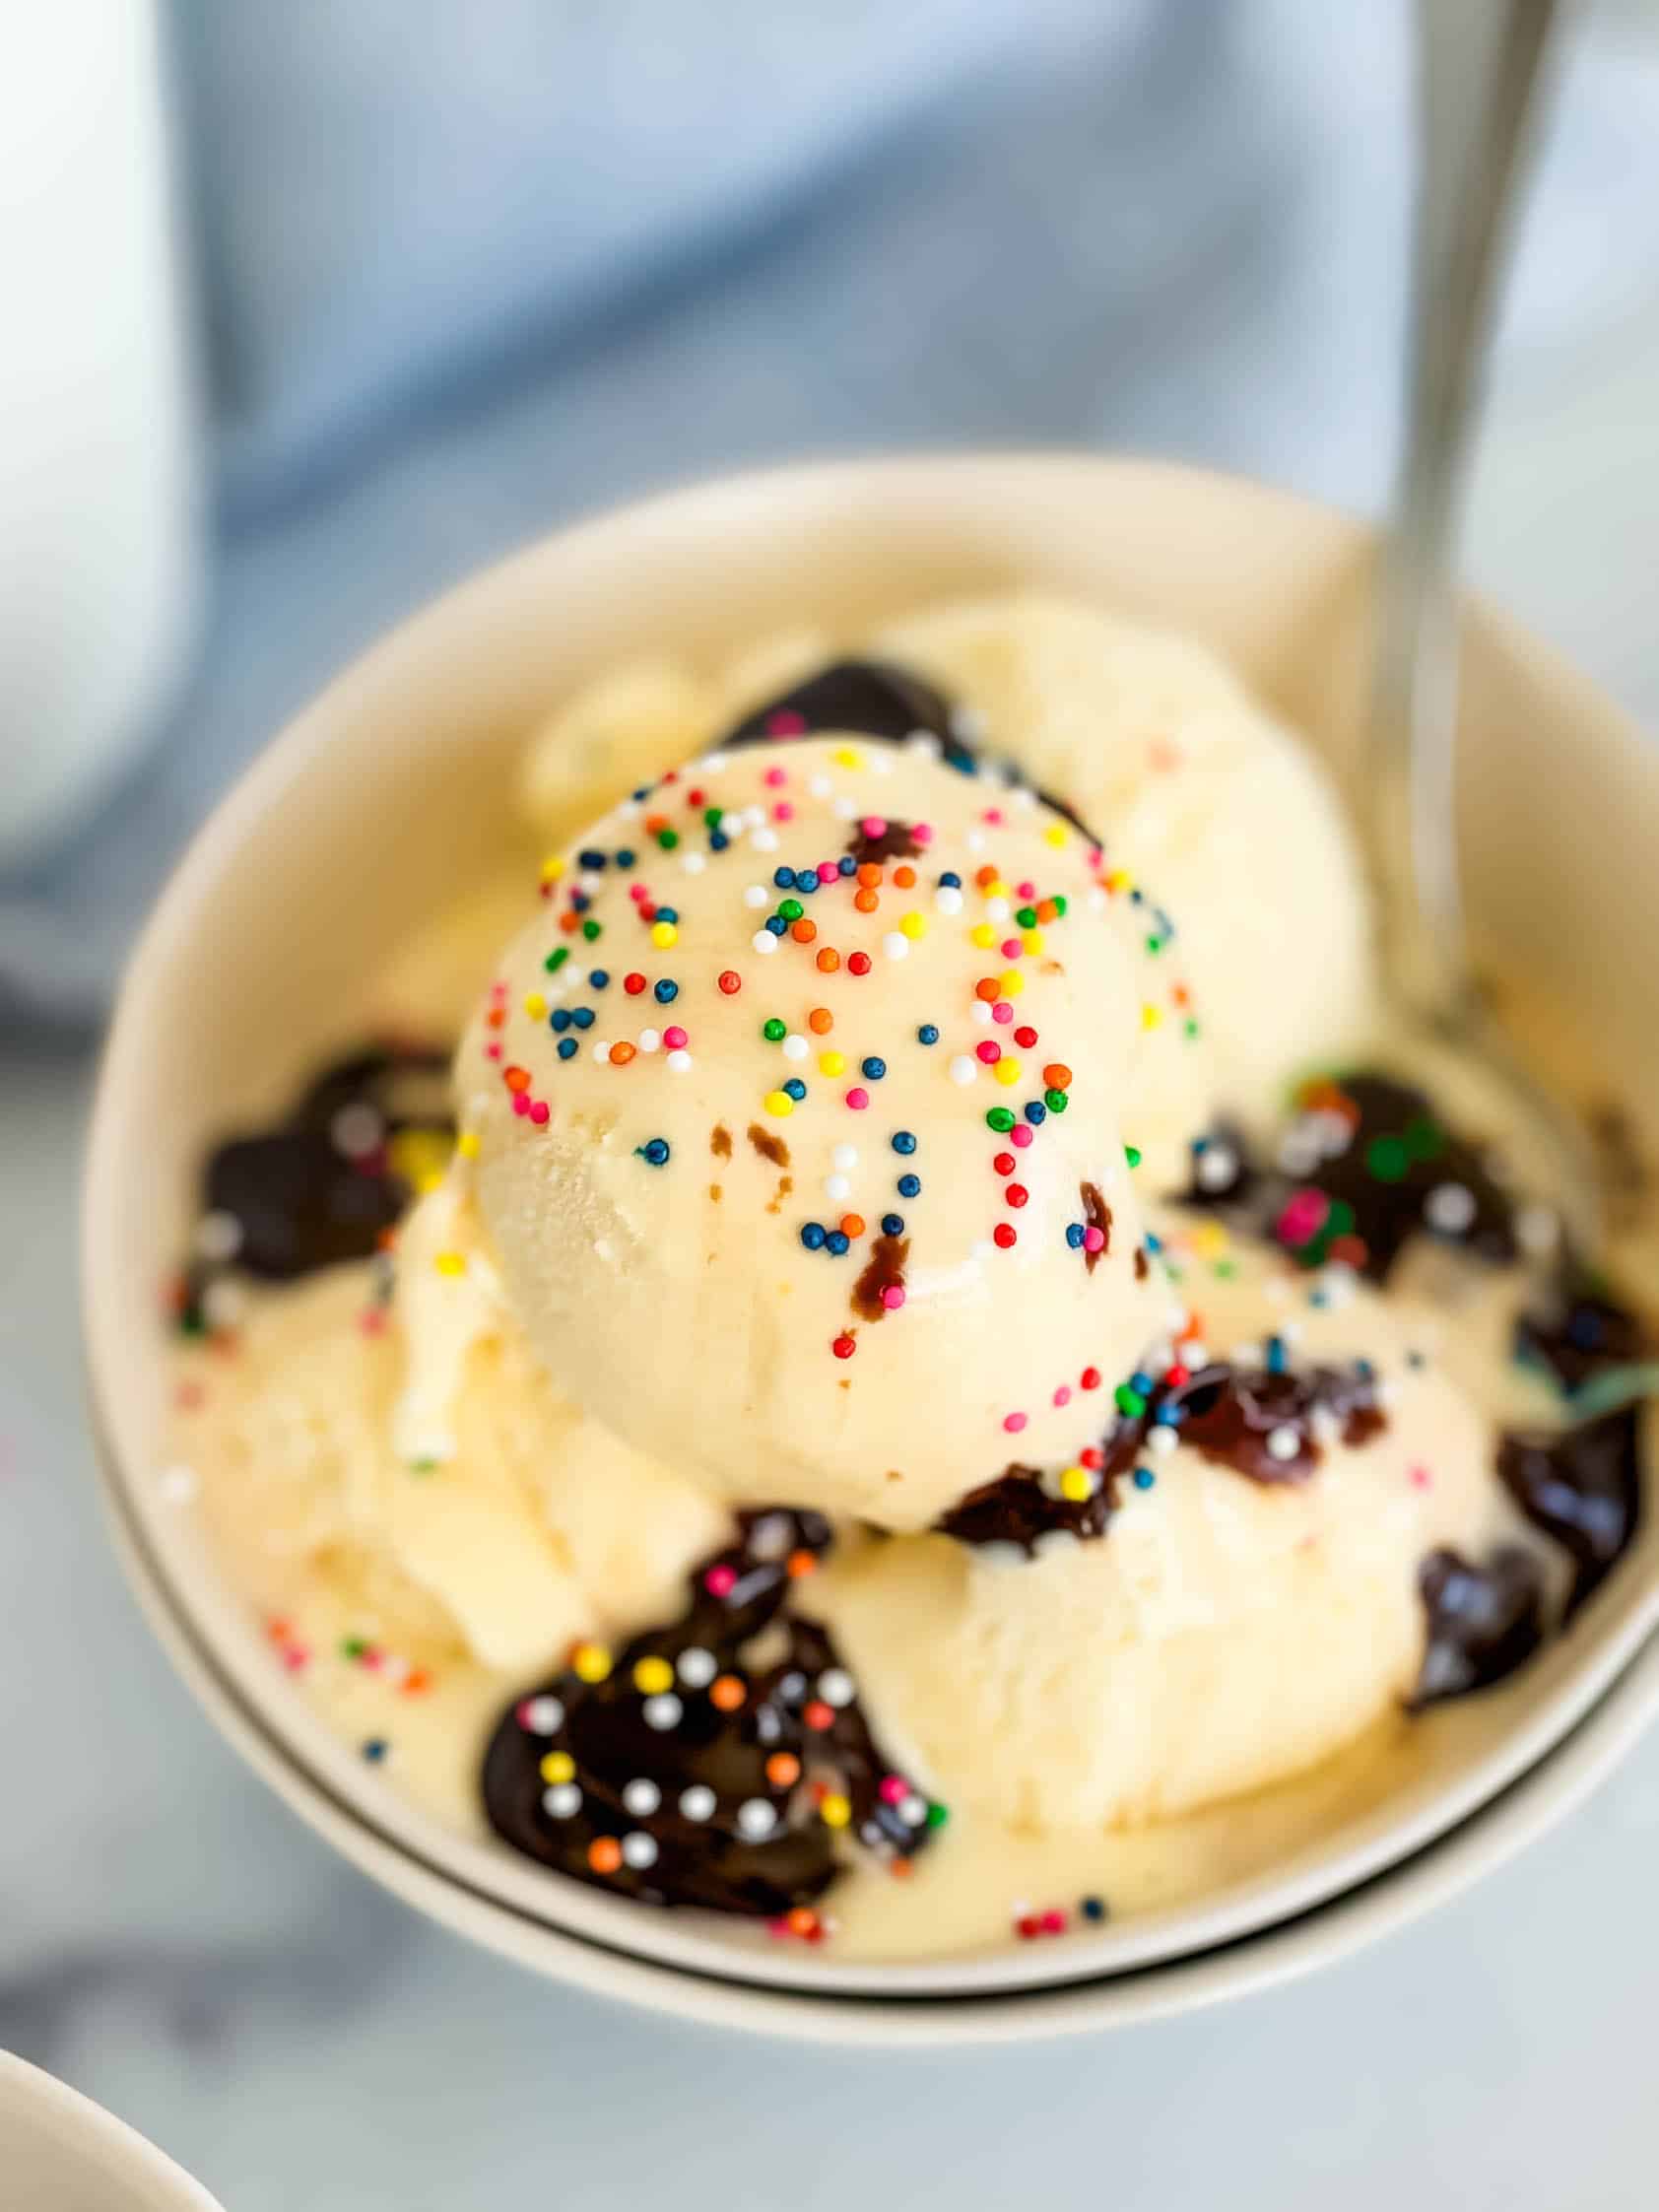 Colorful sprinkles on top of vanilla ice cream.